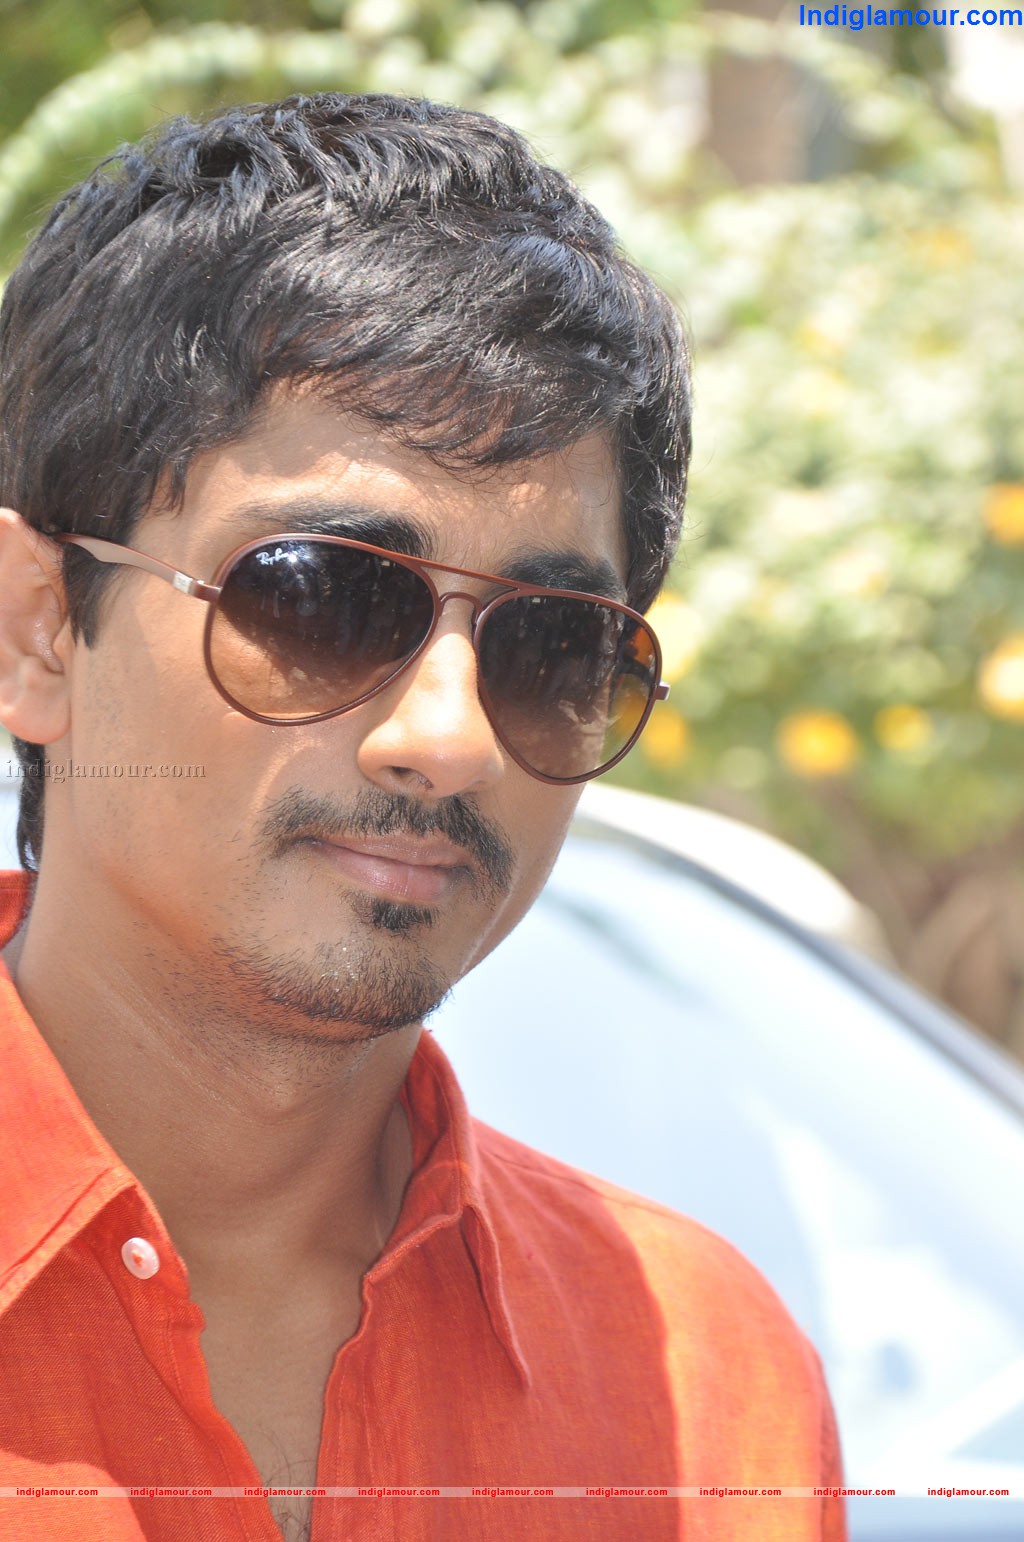 Siddharth Cool New Photos And HD Wallpapers  IndiaWordscom